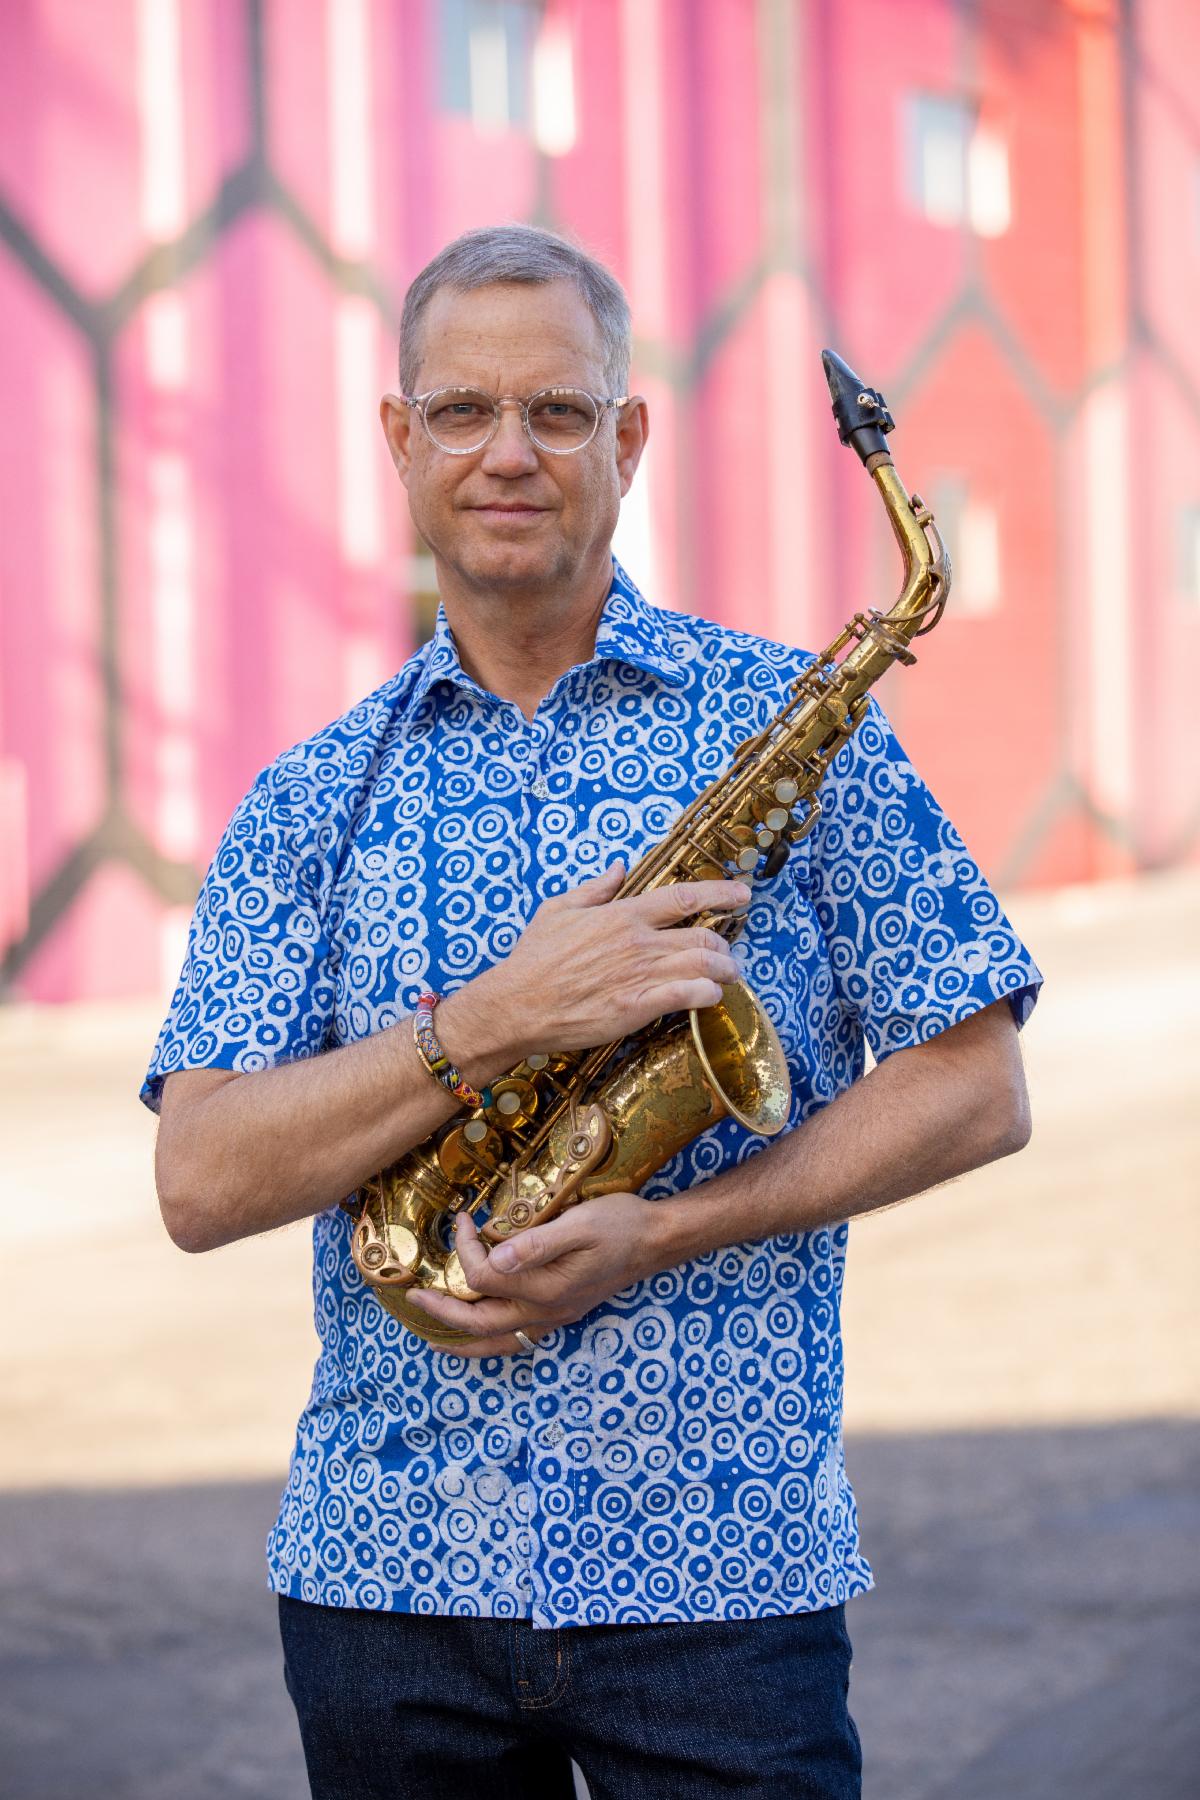 Saxophonist-composer Benjamin Boone, whose new album "Joy" is a collaboration with the Ghana Jazz Collective. (Photo: Tamela Ryatt)